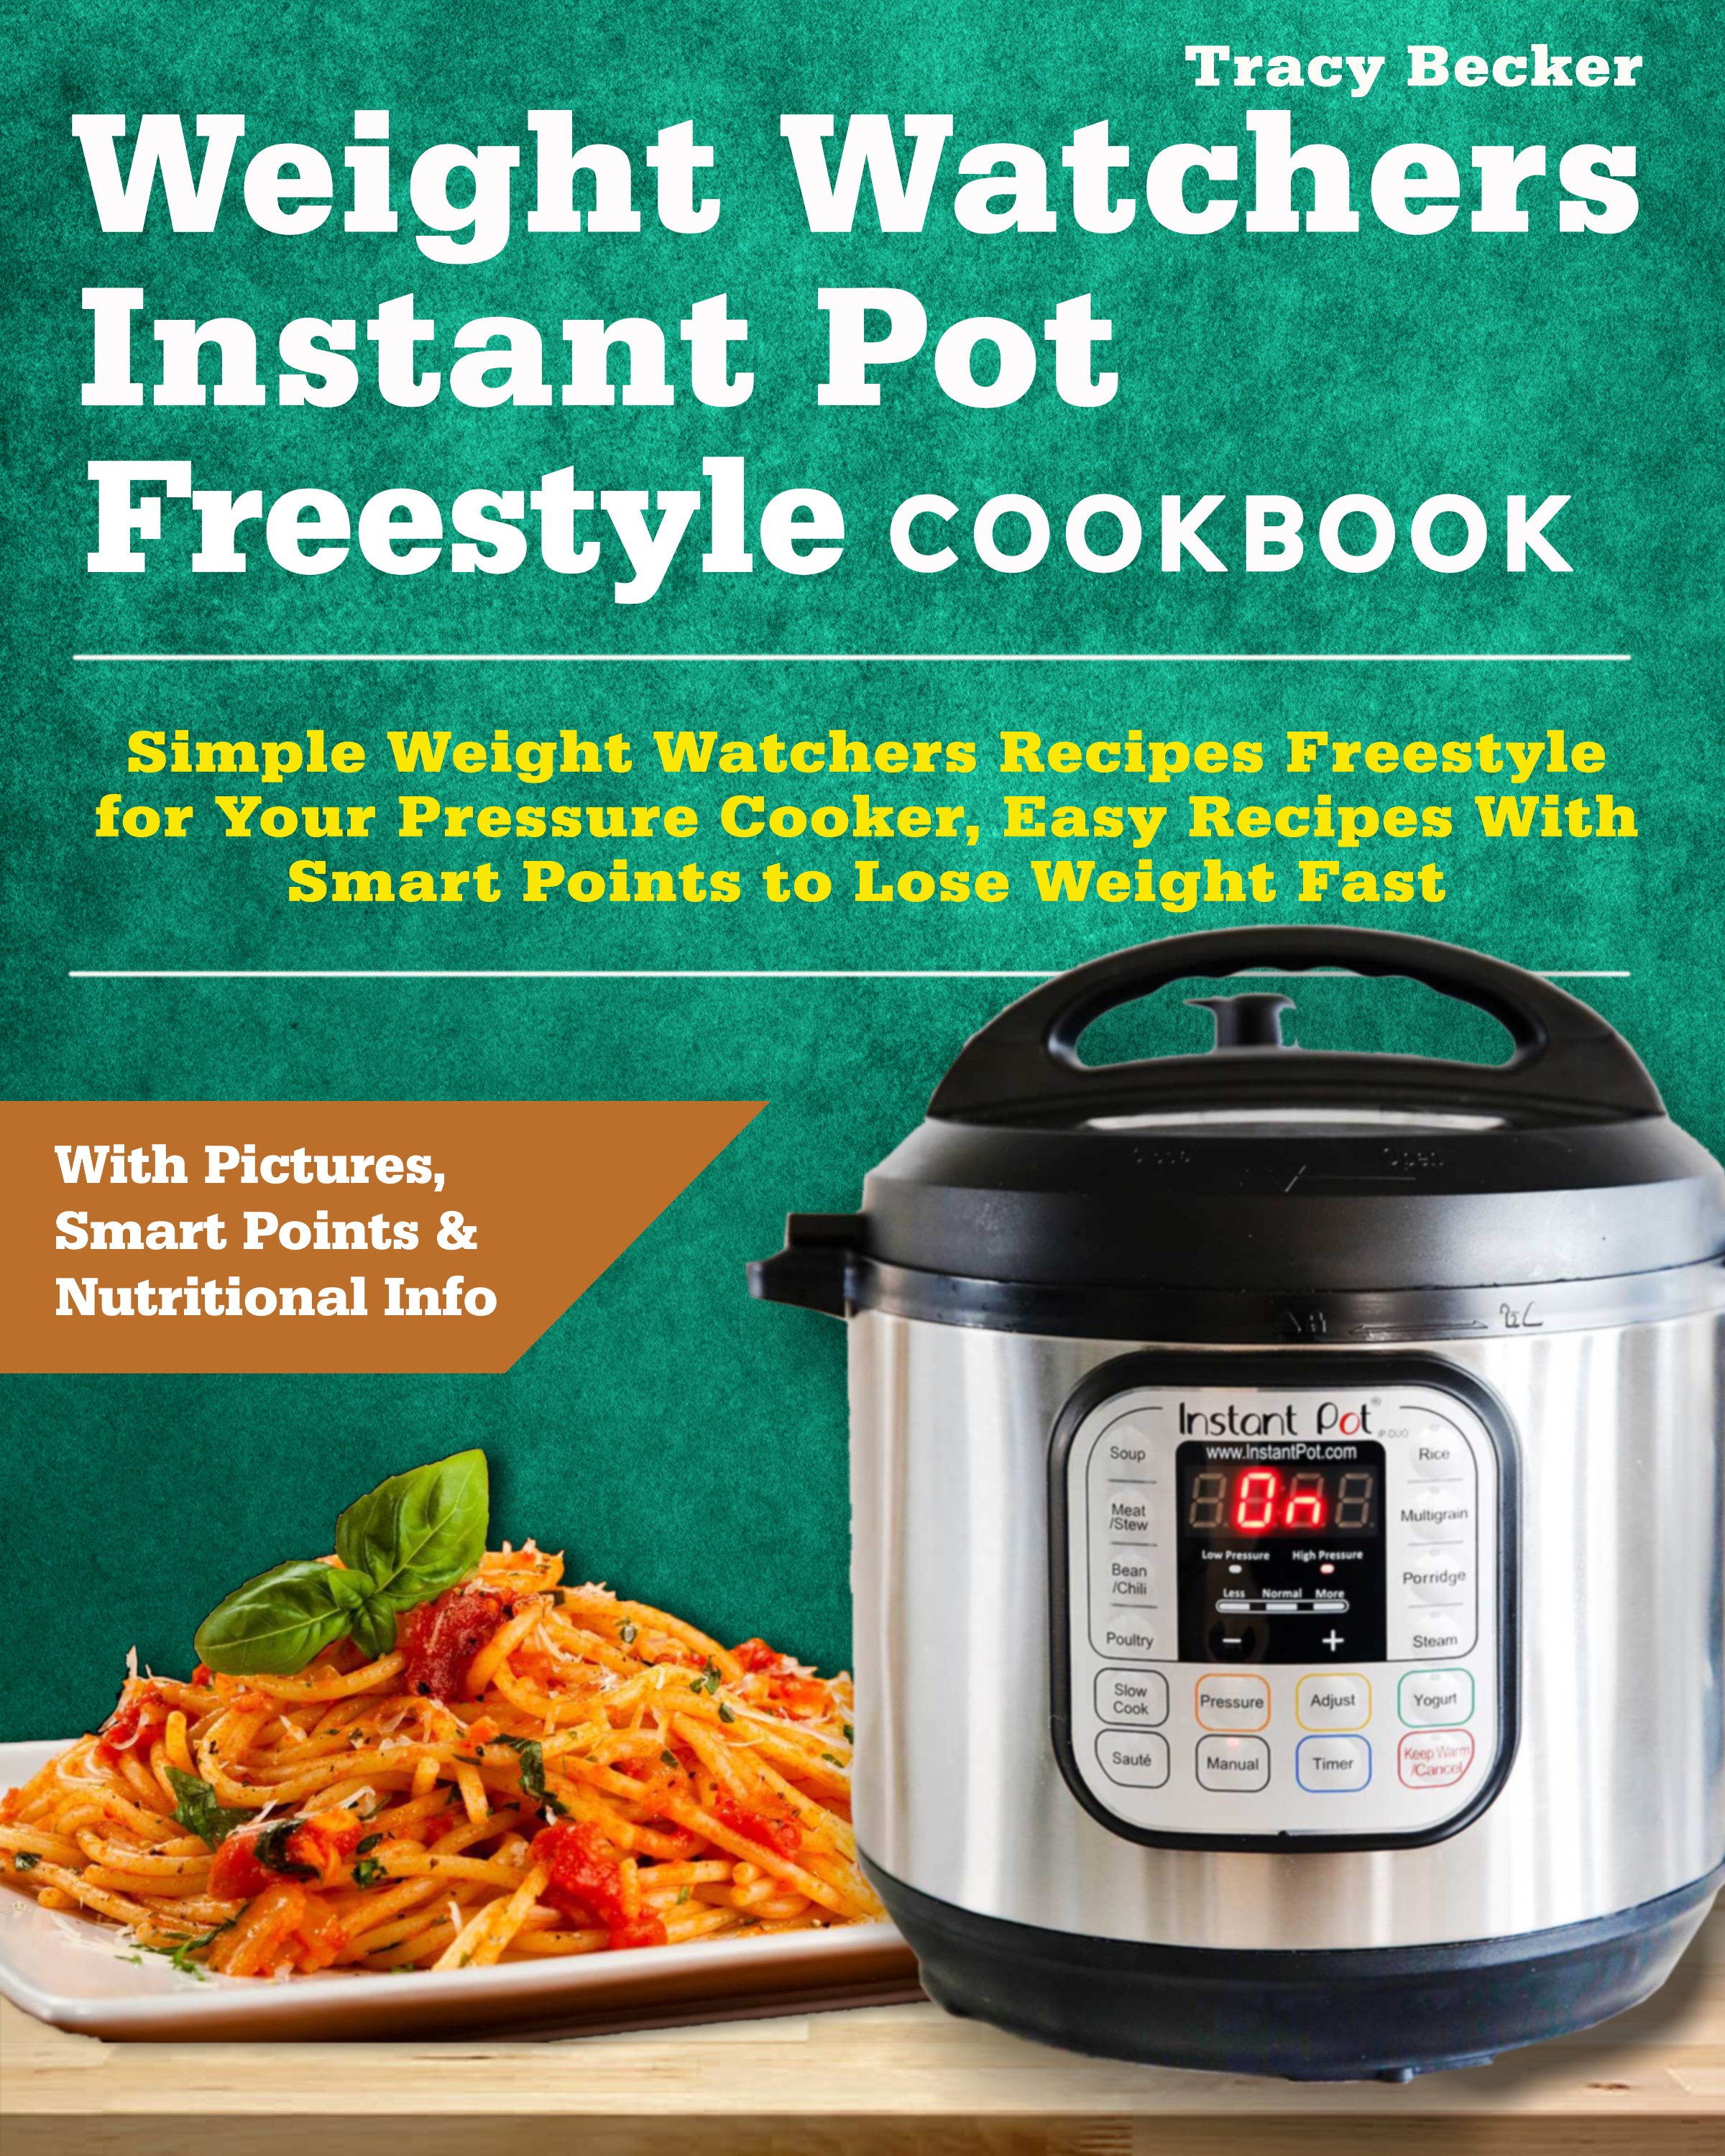 FREE: Weight Watchers Instant Pot Freestyle Cookbook: Simple Weight Watchers Recipes Freestyle for Your Pressure Cooker, Easy Recipes With Smart Points to Lose Weight Fast by Tracy Becker